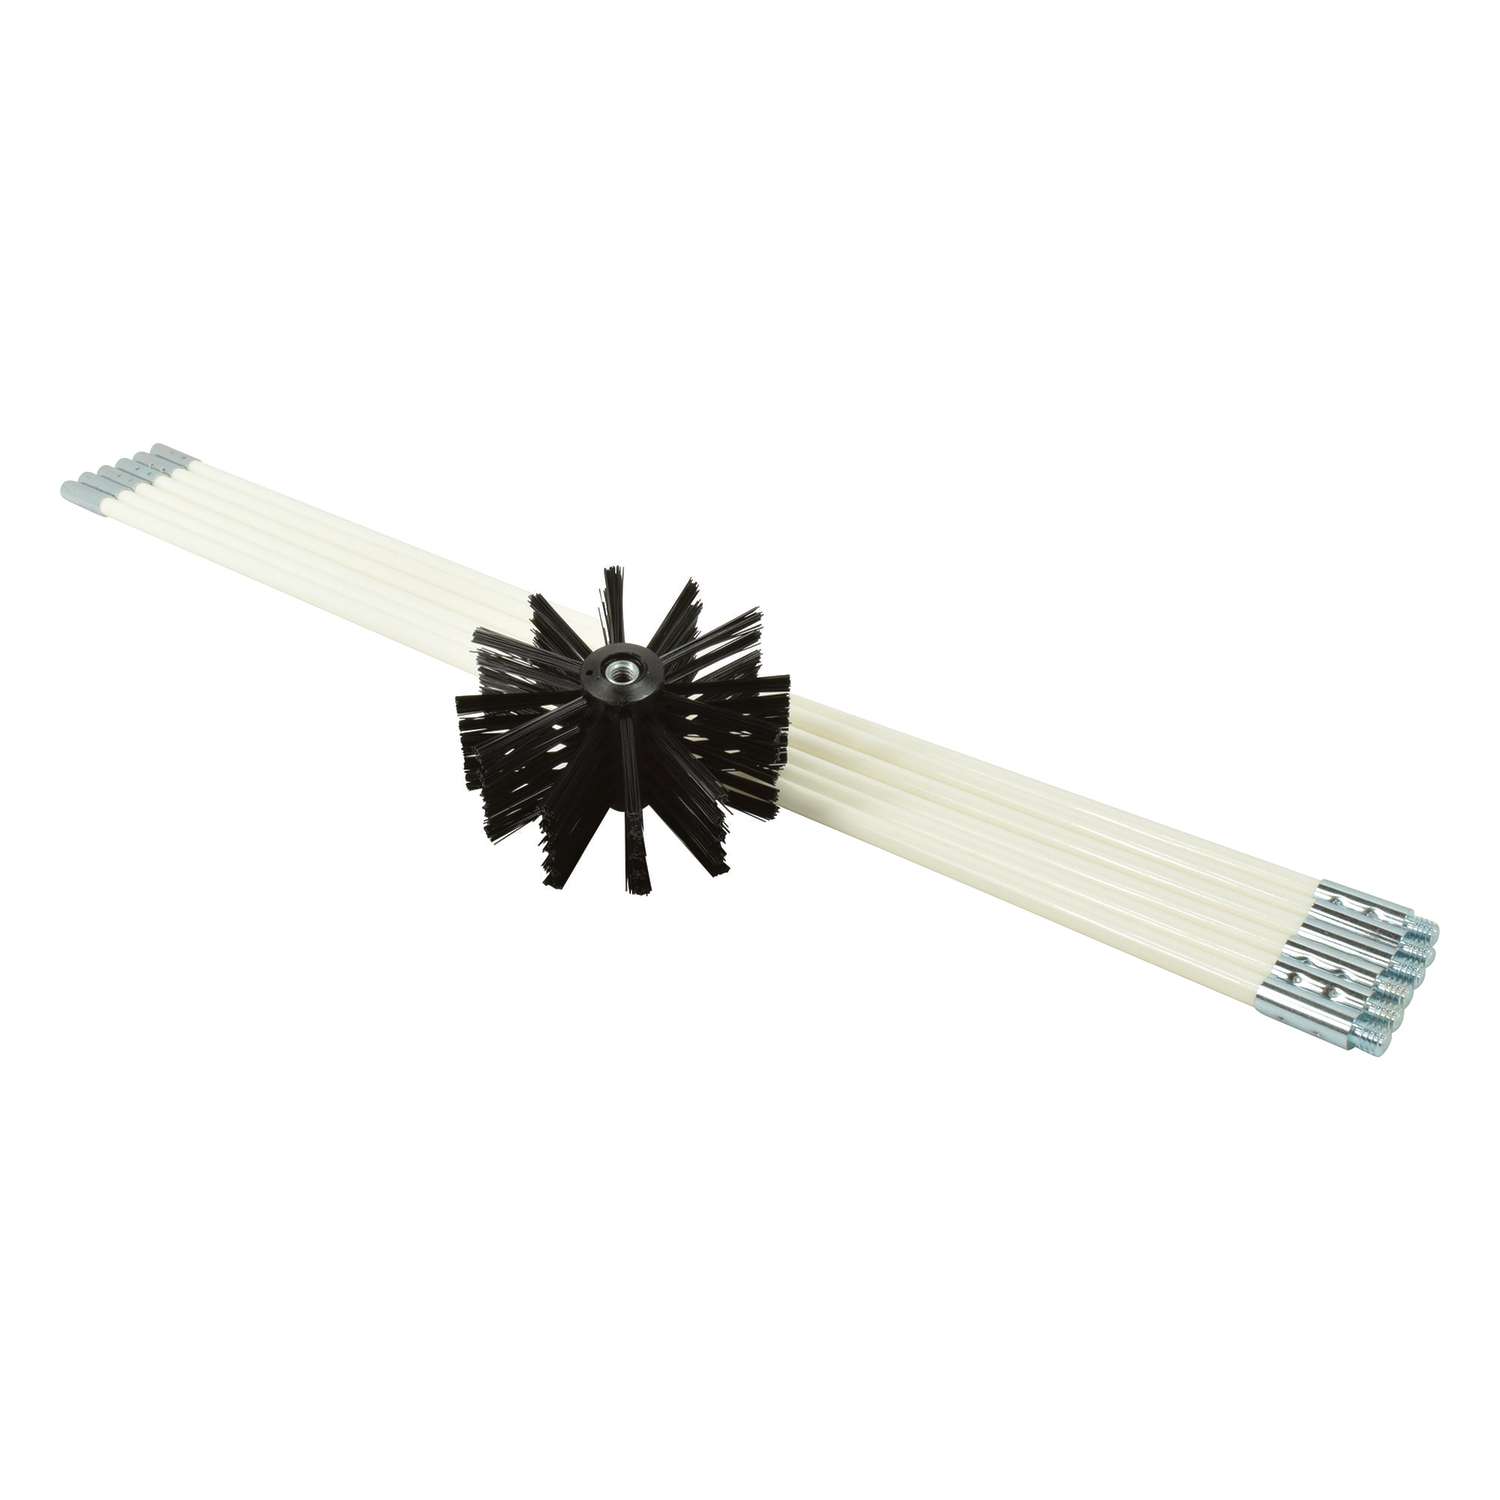 1pc Washing Machine Cleaning Brush, Dryer Vent Lint Trap Cleaning Brush,  Home Laundry Room Tub And Washer Cleaner Brush